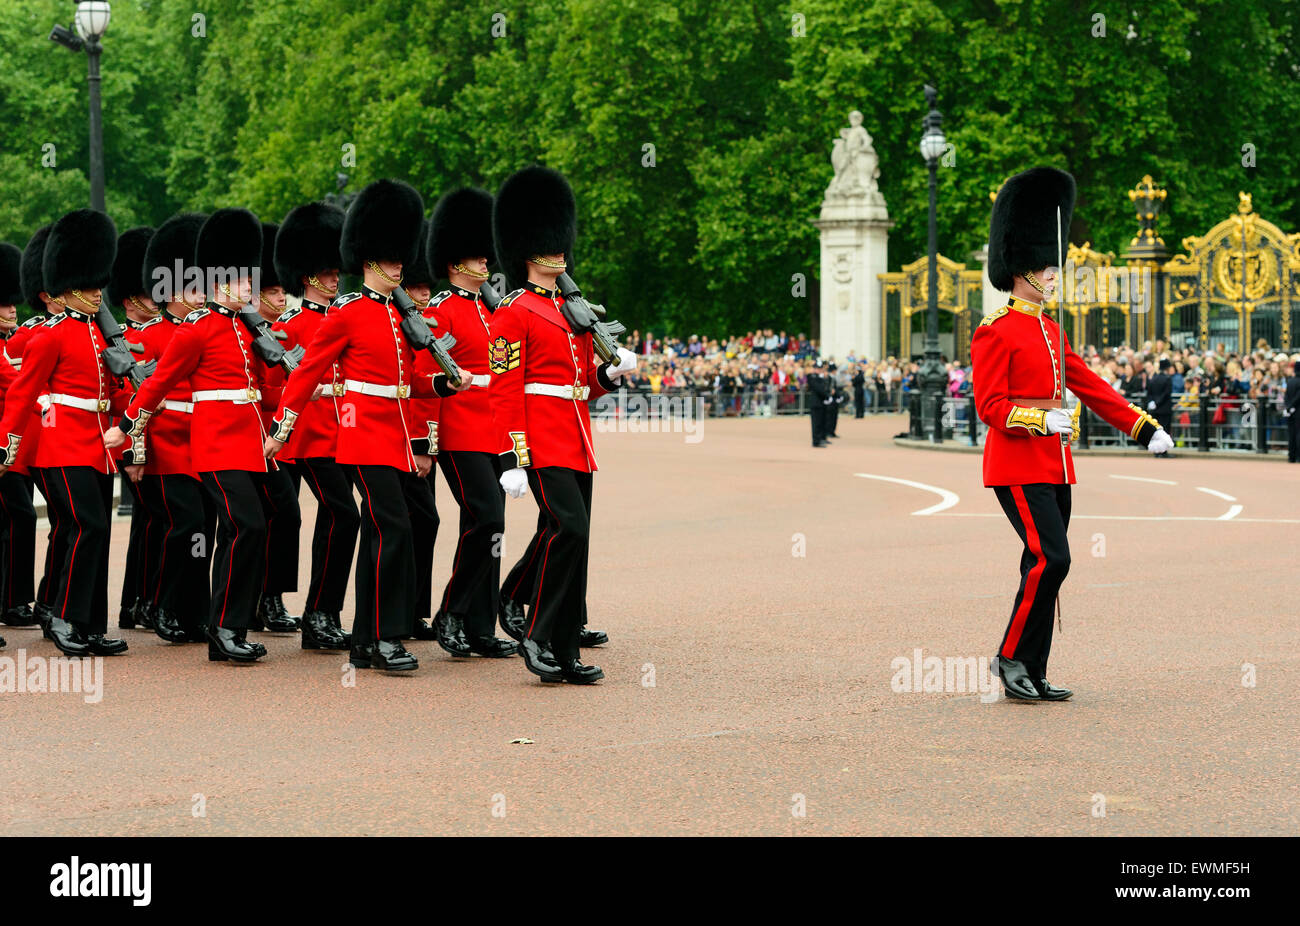 Trooping the Colour, annual military parade to celebrate the birthday of Queen Elizabeth II., Buckingham Palace, London, England Stock Photo